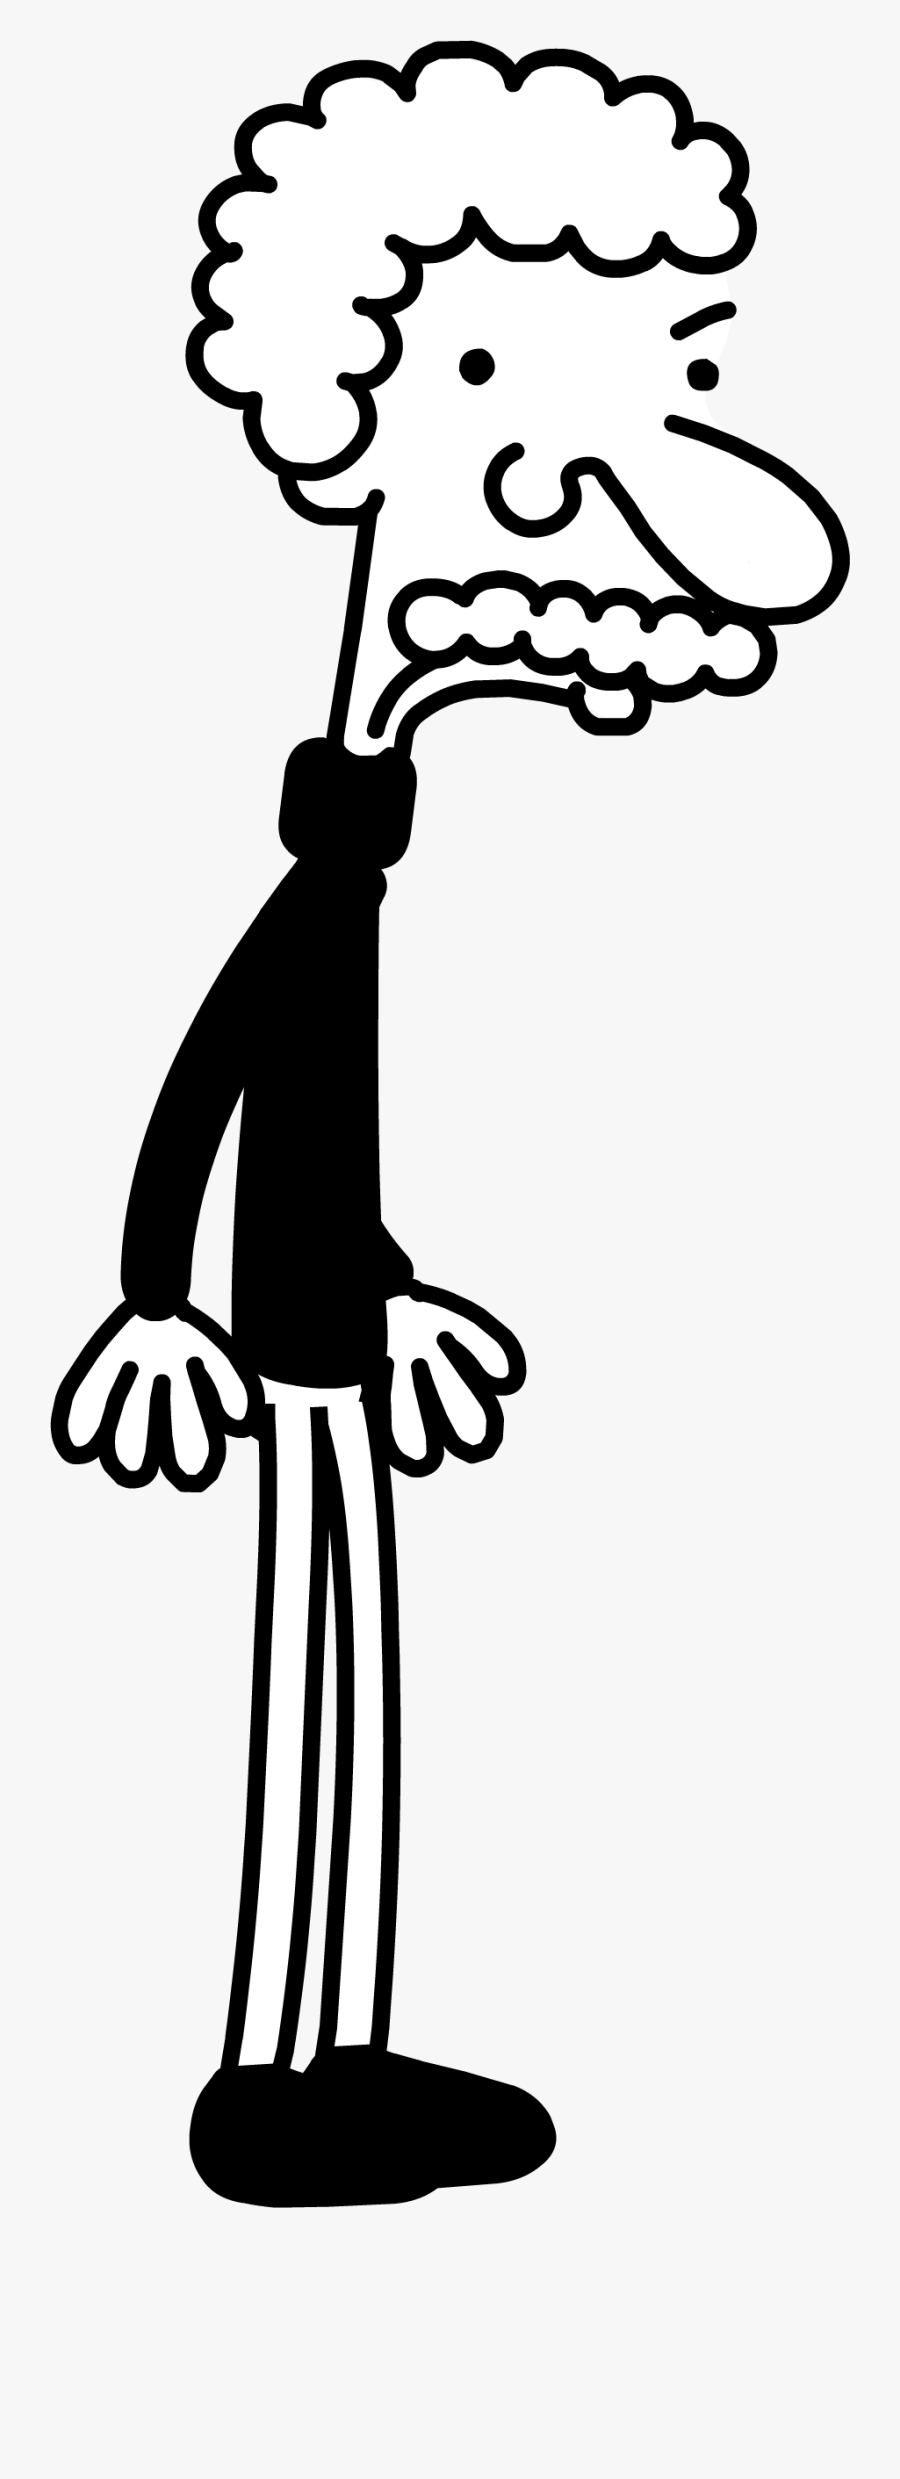 Diary Of A Wimpy Kid Wiki - Mr Jefferson Diary Wimpy Kid, Transparent Clipart